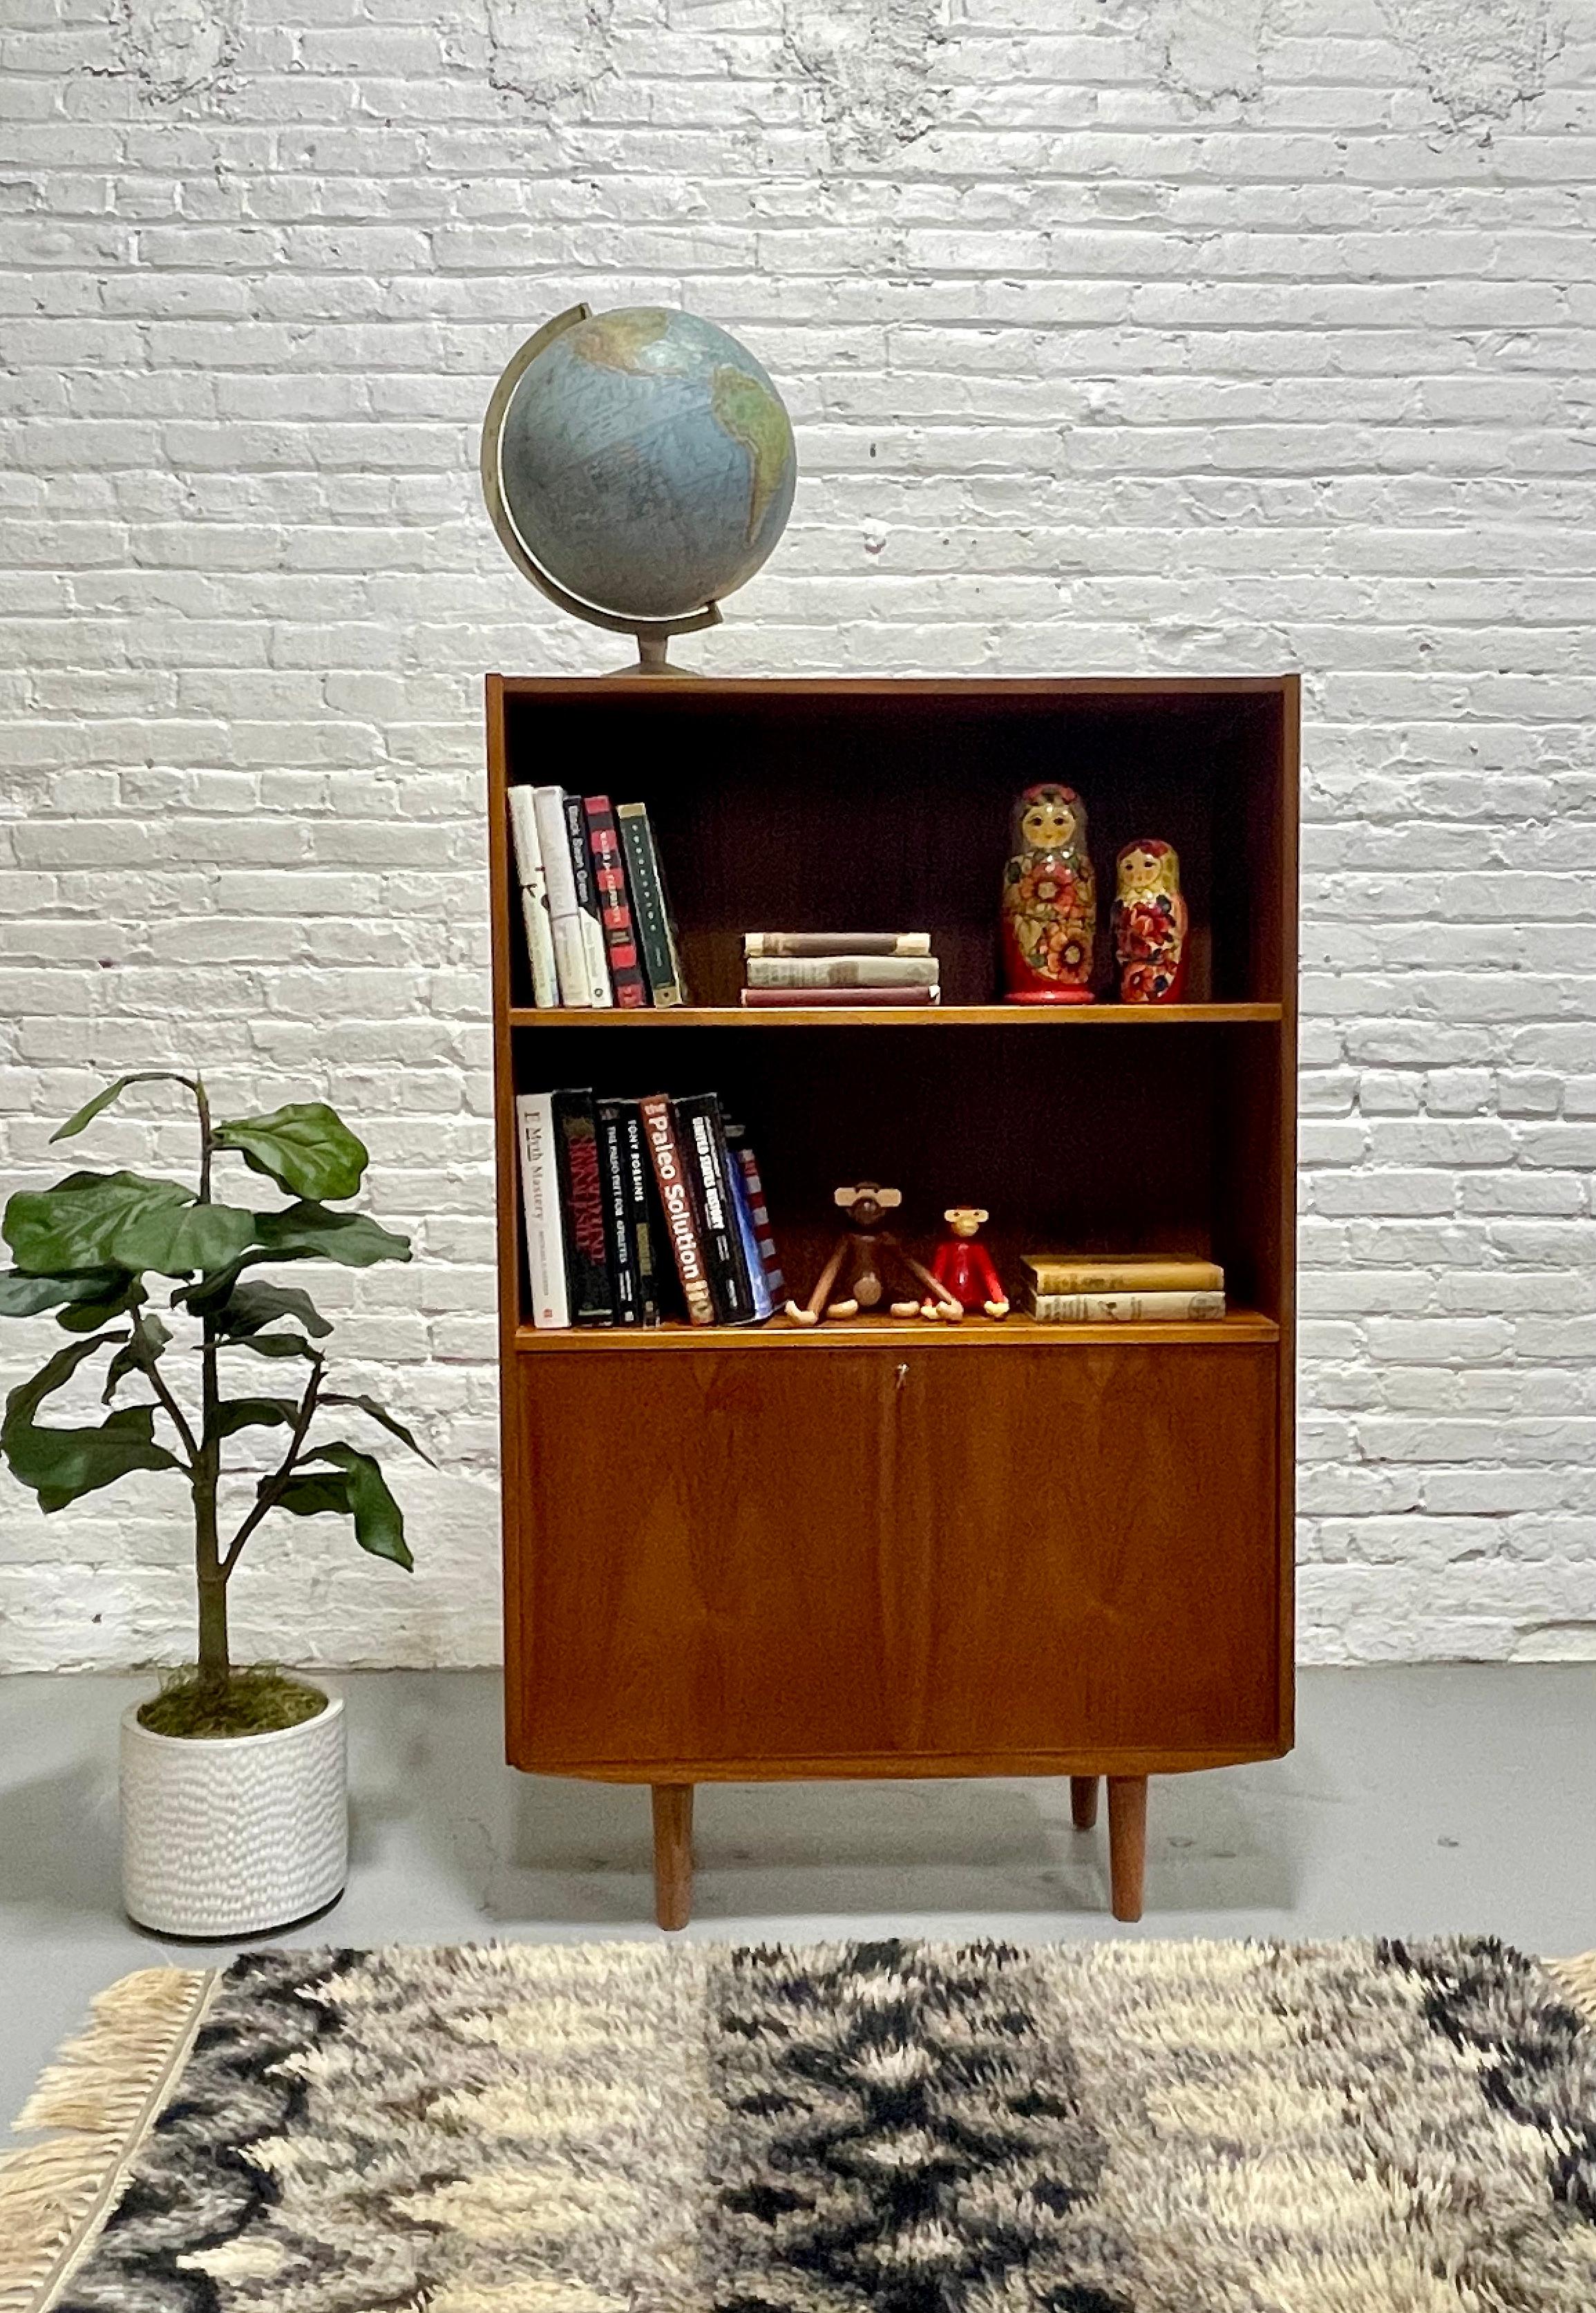 Danish Mid Century Modern Teak Bookcase / Liquor Bar Cabinet, c. 1960’s.  Loads of storage for all your books and collectables across the top two spacious shelving areas and a lockable (key included!) lower area for additional storage or as a mini